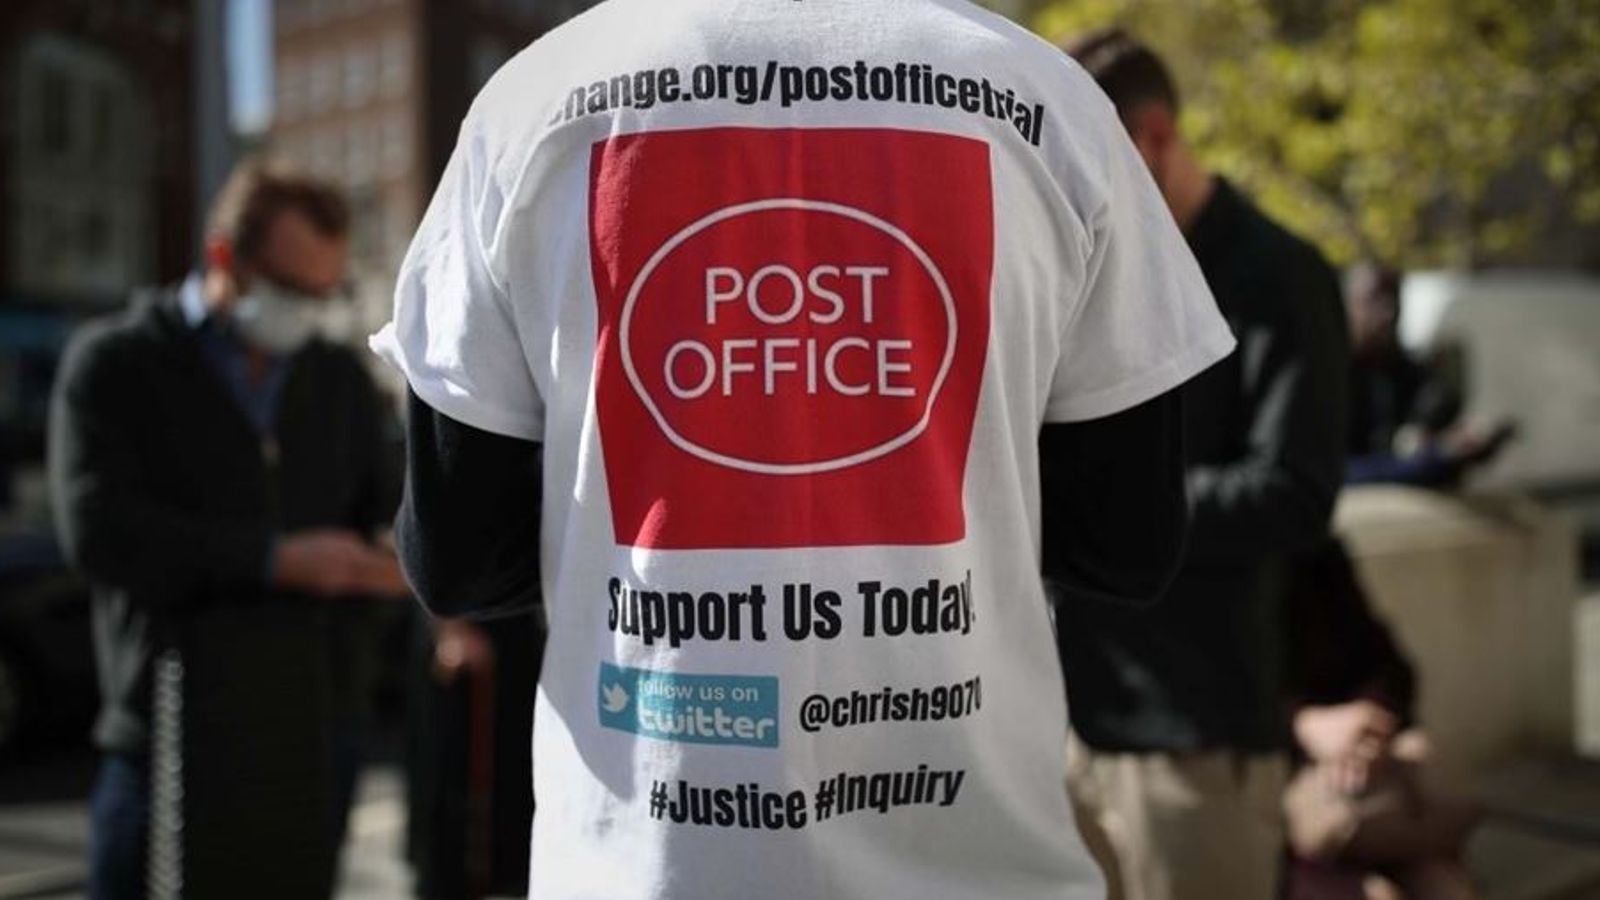 Post Office scandal: Compensation scheme for postmasters unveiled by Grant Shapps